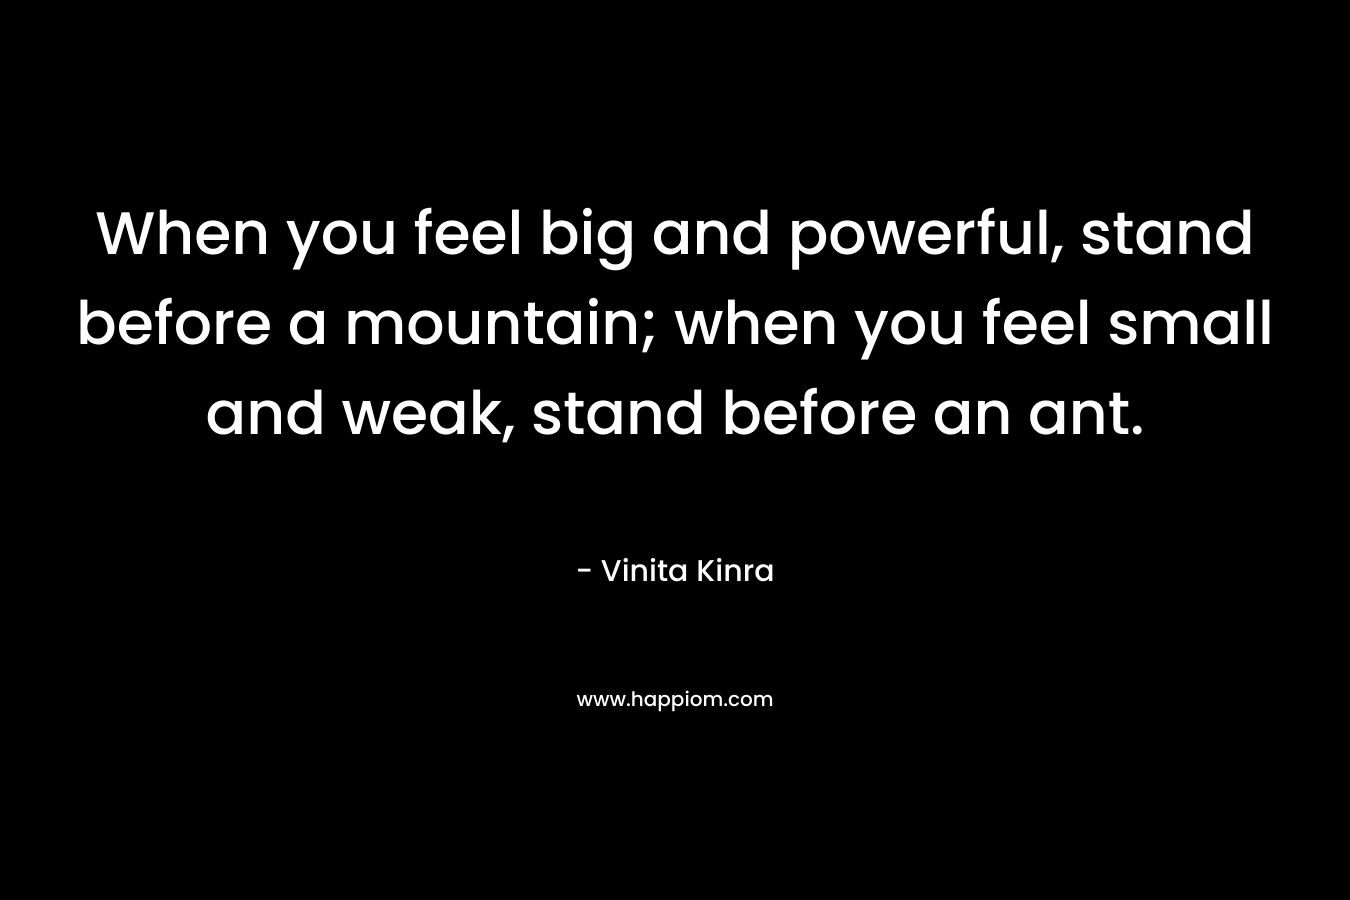 When you feel big and powerful, stand before a mountain; when you feel small and weak, stand before an ant.